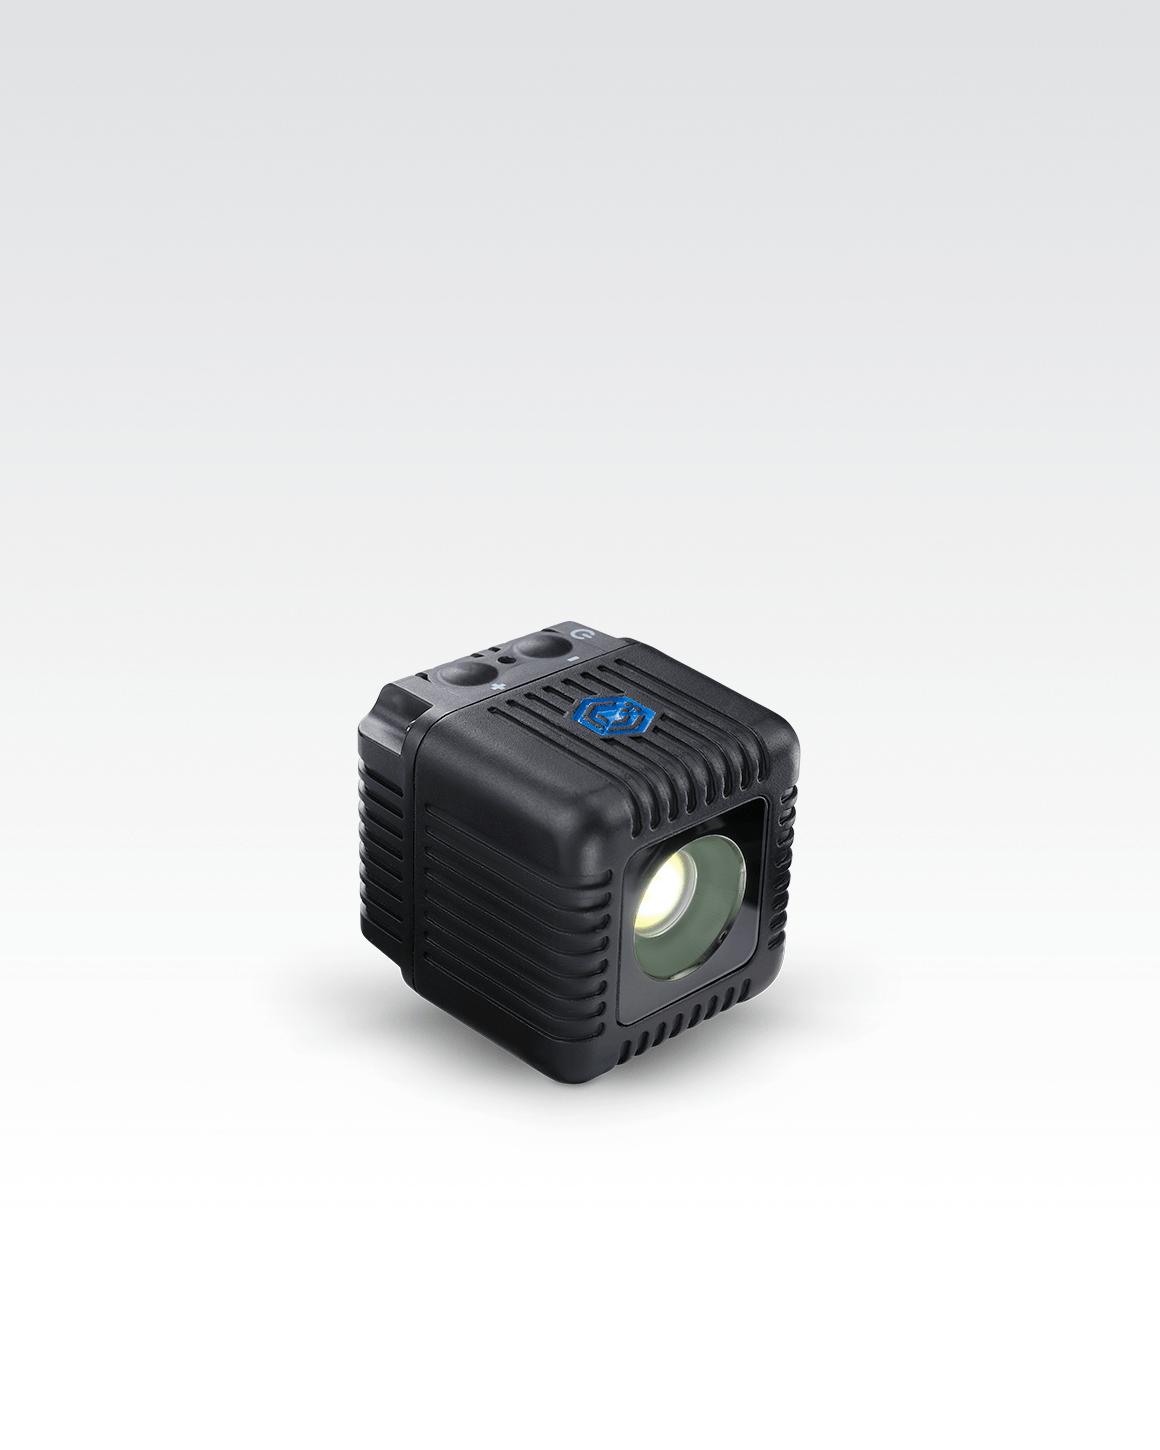 Close shot of Lume Cube 2.0 Waterproof LED showing + and - and power buttons.